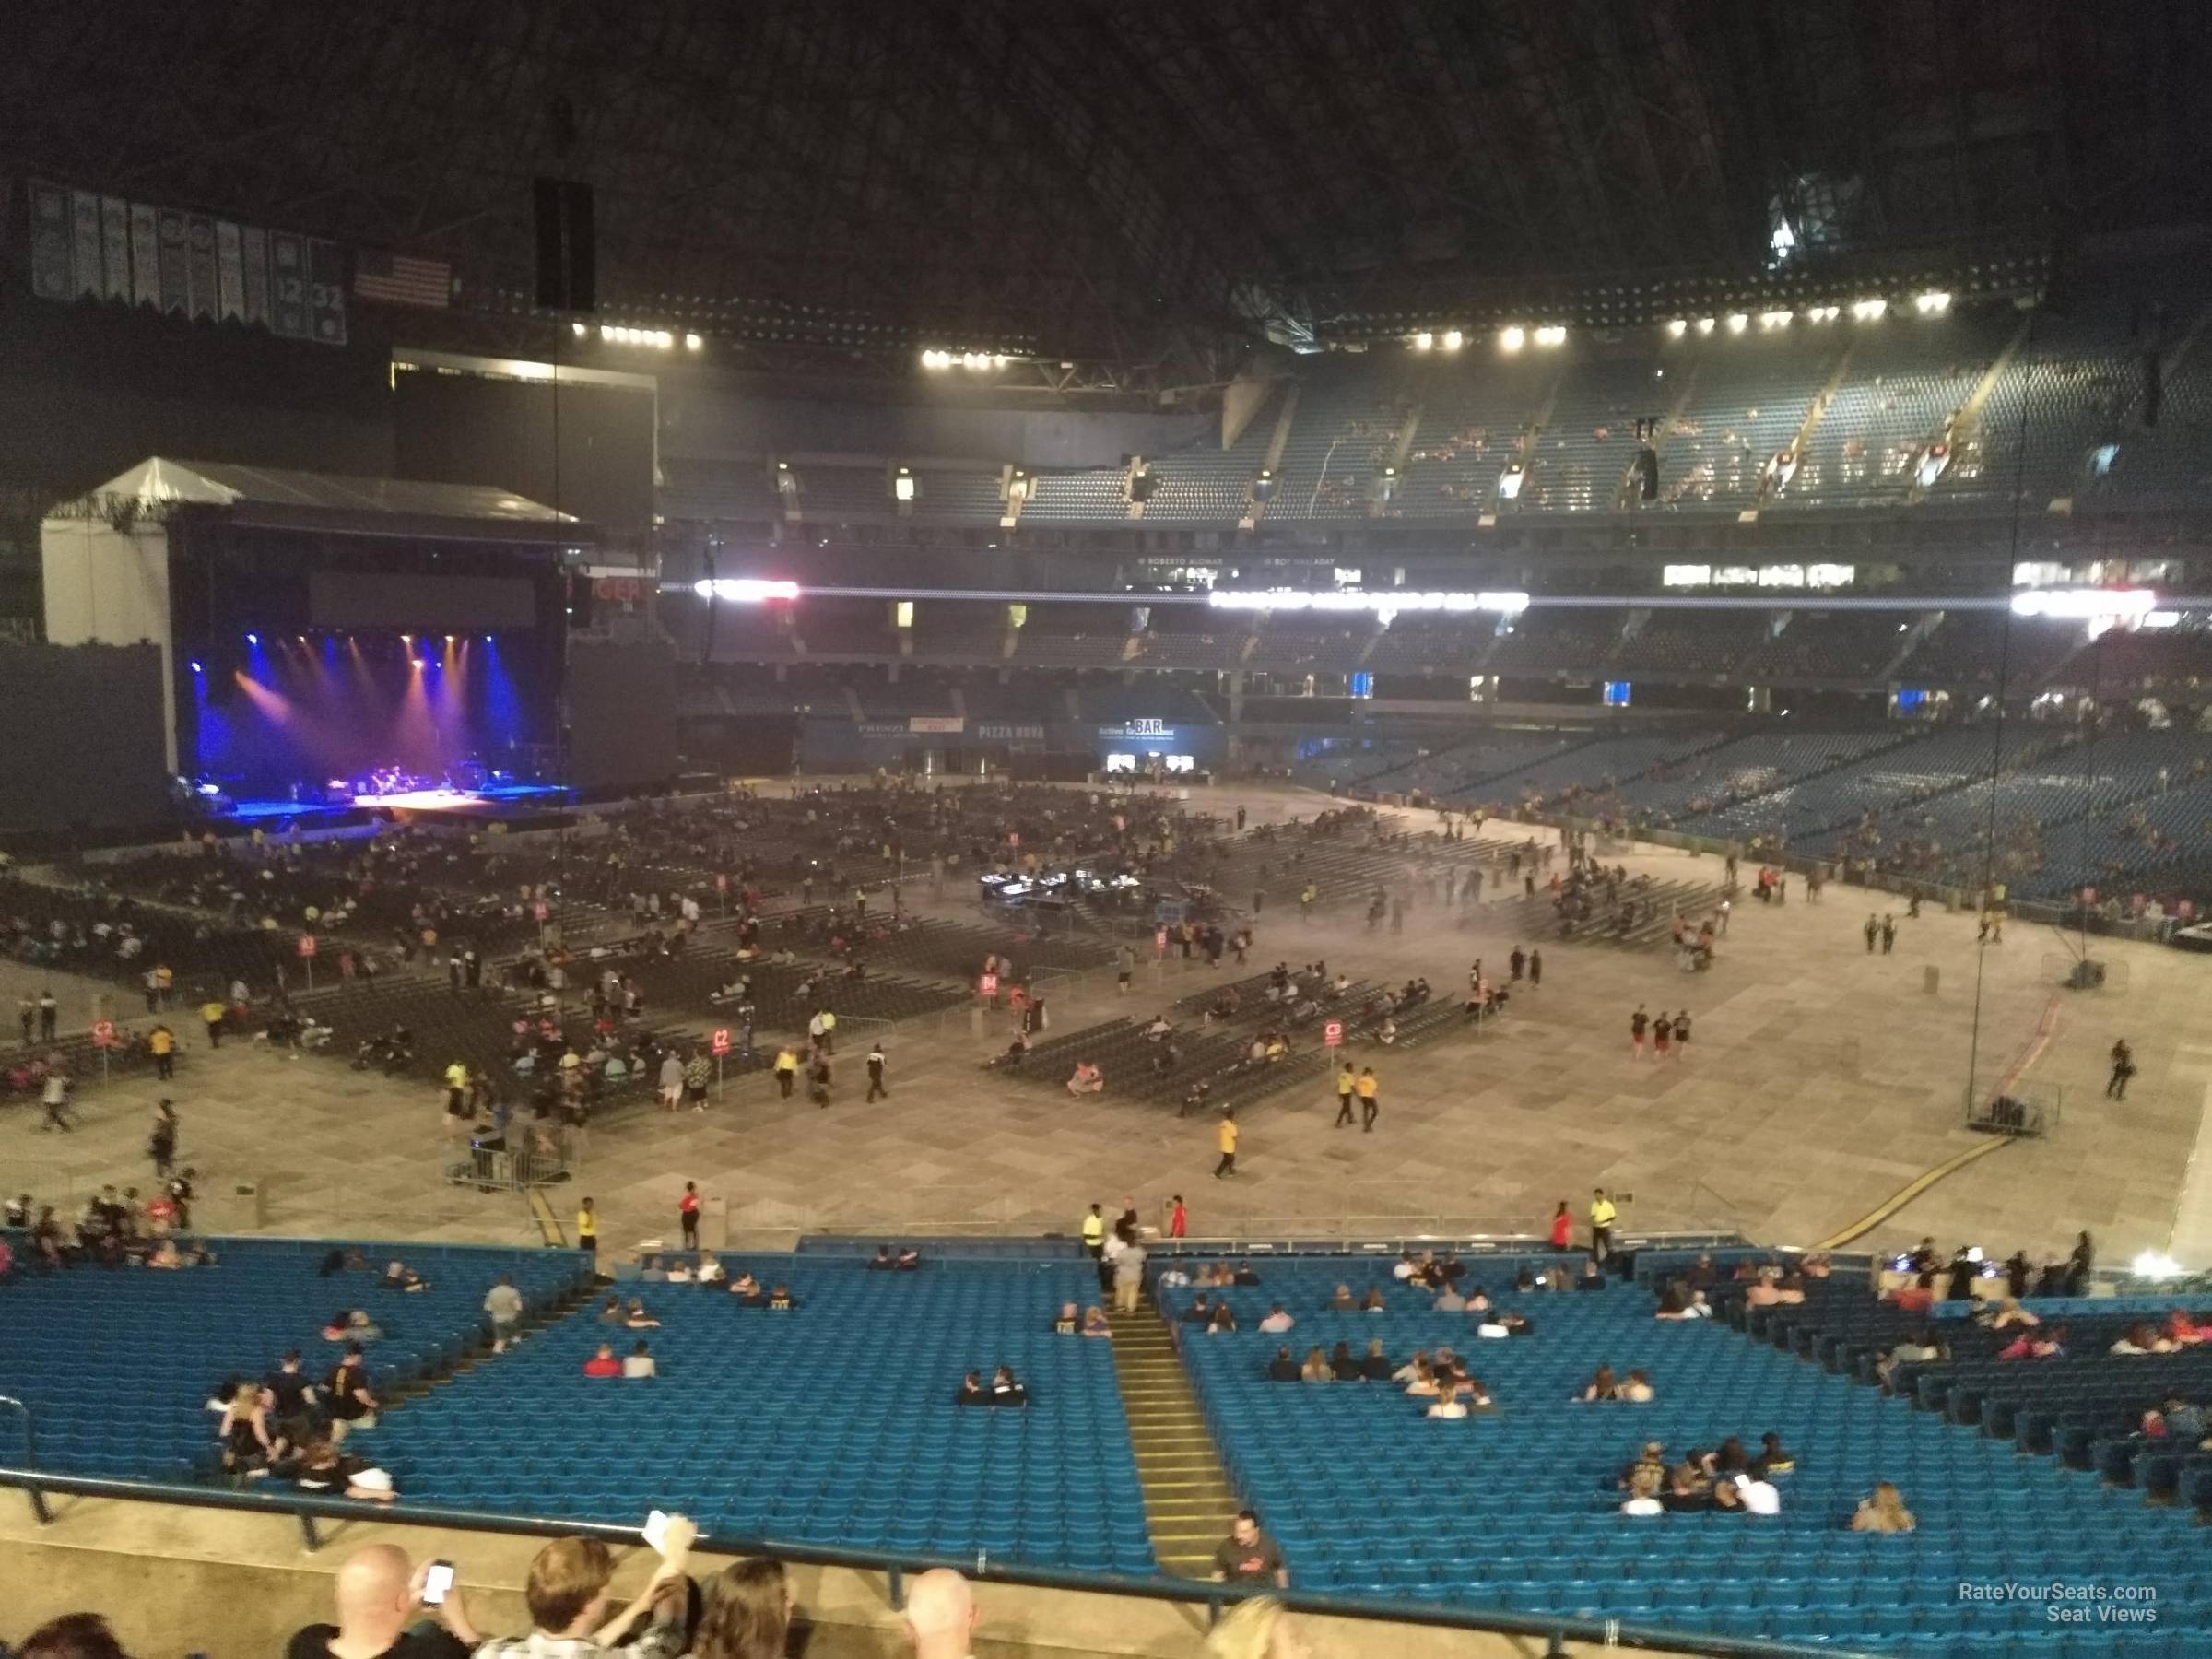 section 232, row 7 seat view  for concert - rogers centre